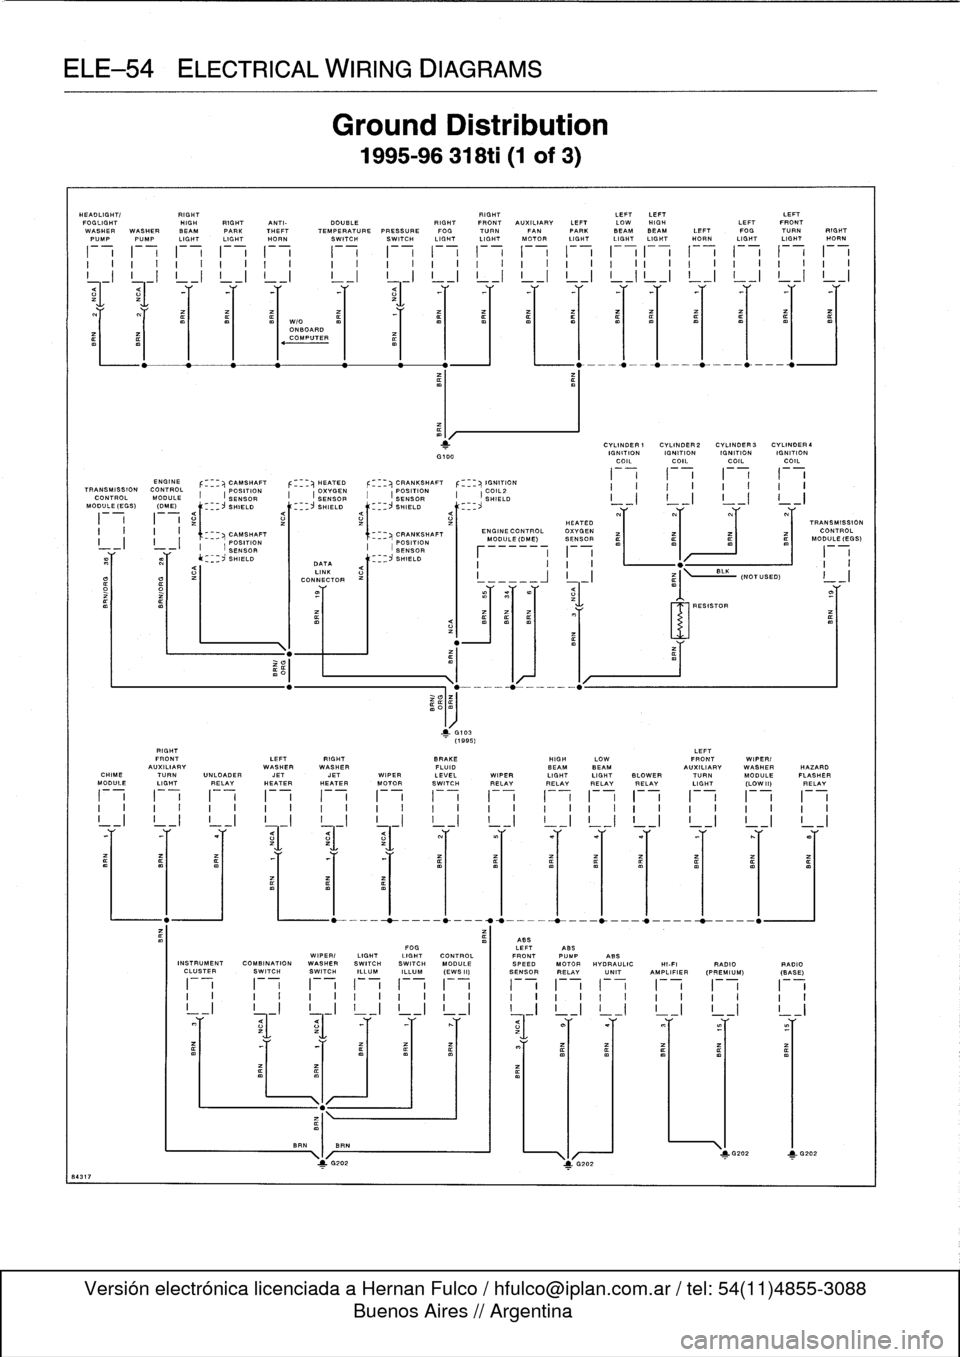 BMW 328i 1995 E36 Service Manual 
ELE-54
ELECTRICAL
WIRING
DIAGRAMS

HEADLIGHT/

	

RIGHT

	

RIGHT

	

LEFTLEFT

	

LEFT
FOGLIGHT

	

HIGH
RIGHT
ANTI-

	

DOUBLE

	

RIGHT
FRONT
AUXILIARY
LEFT
LOW
HIGH

	

LEFT
FRONT
WASHER
WASHER
B